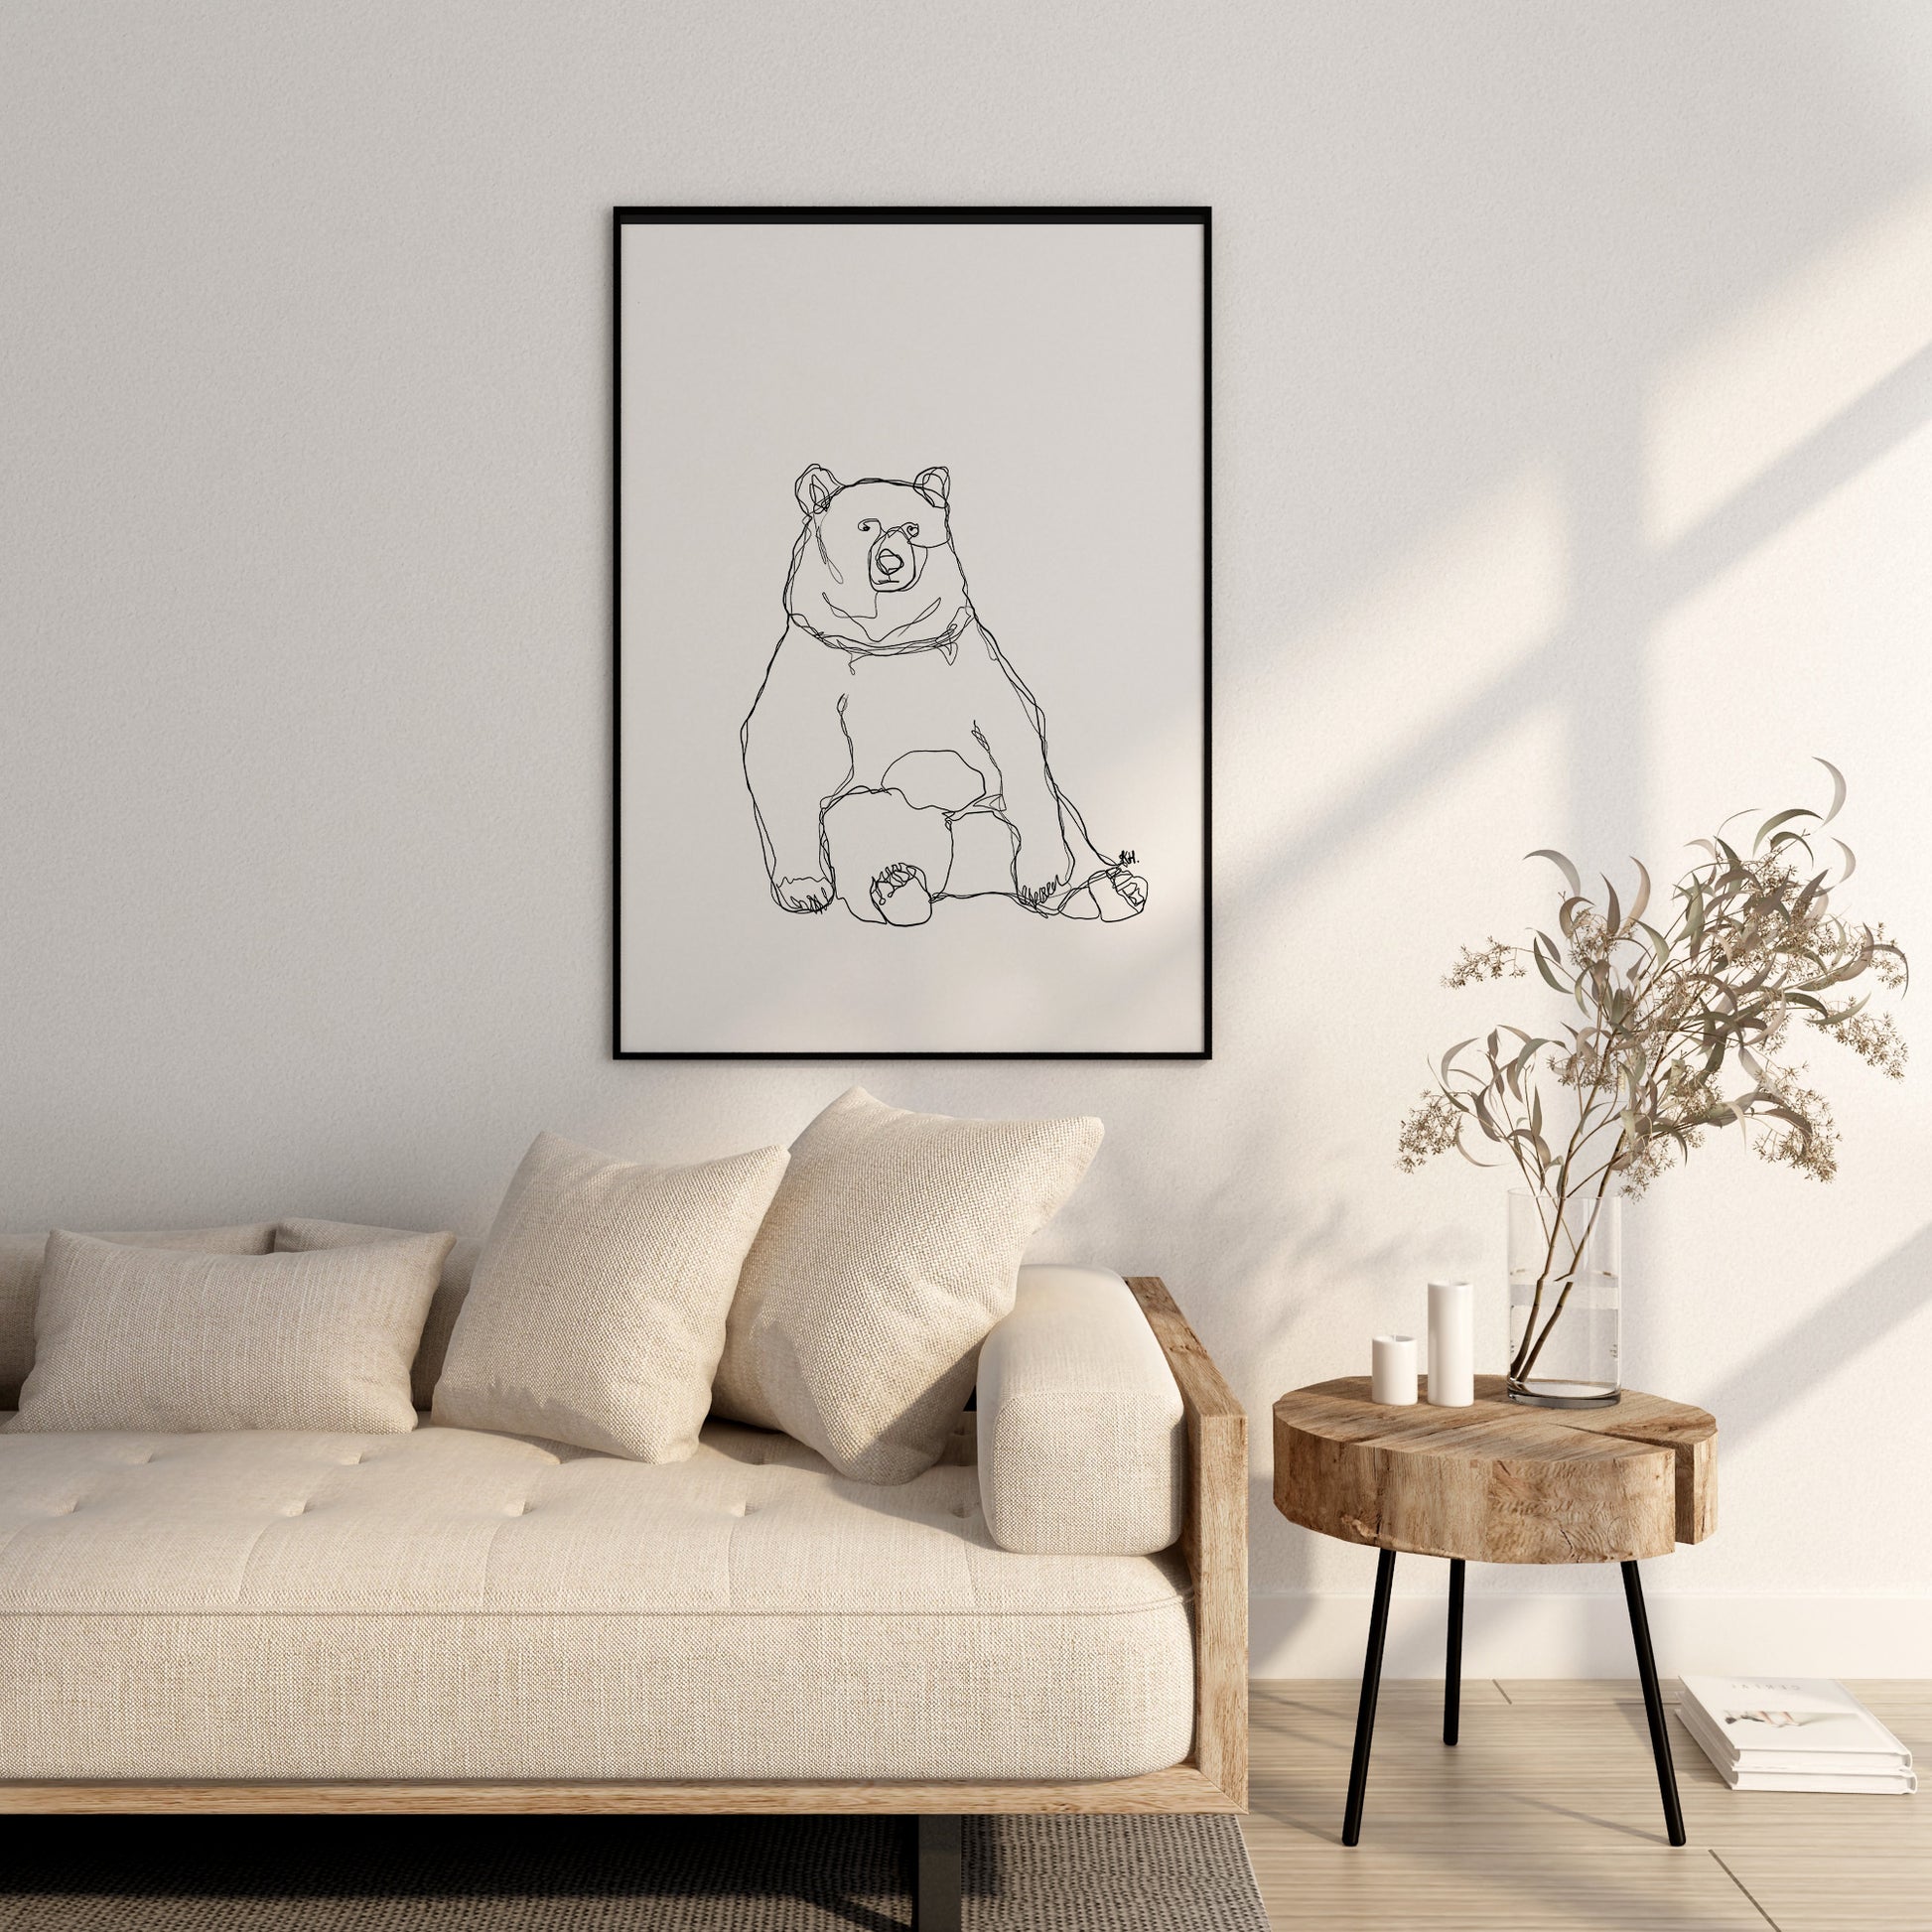 Bear one line drawing print framed in large black print as living room decor